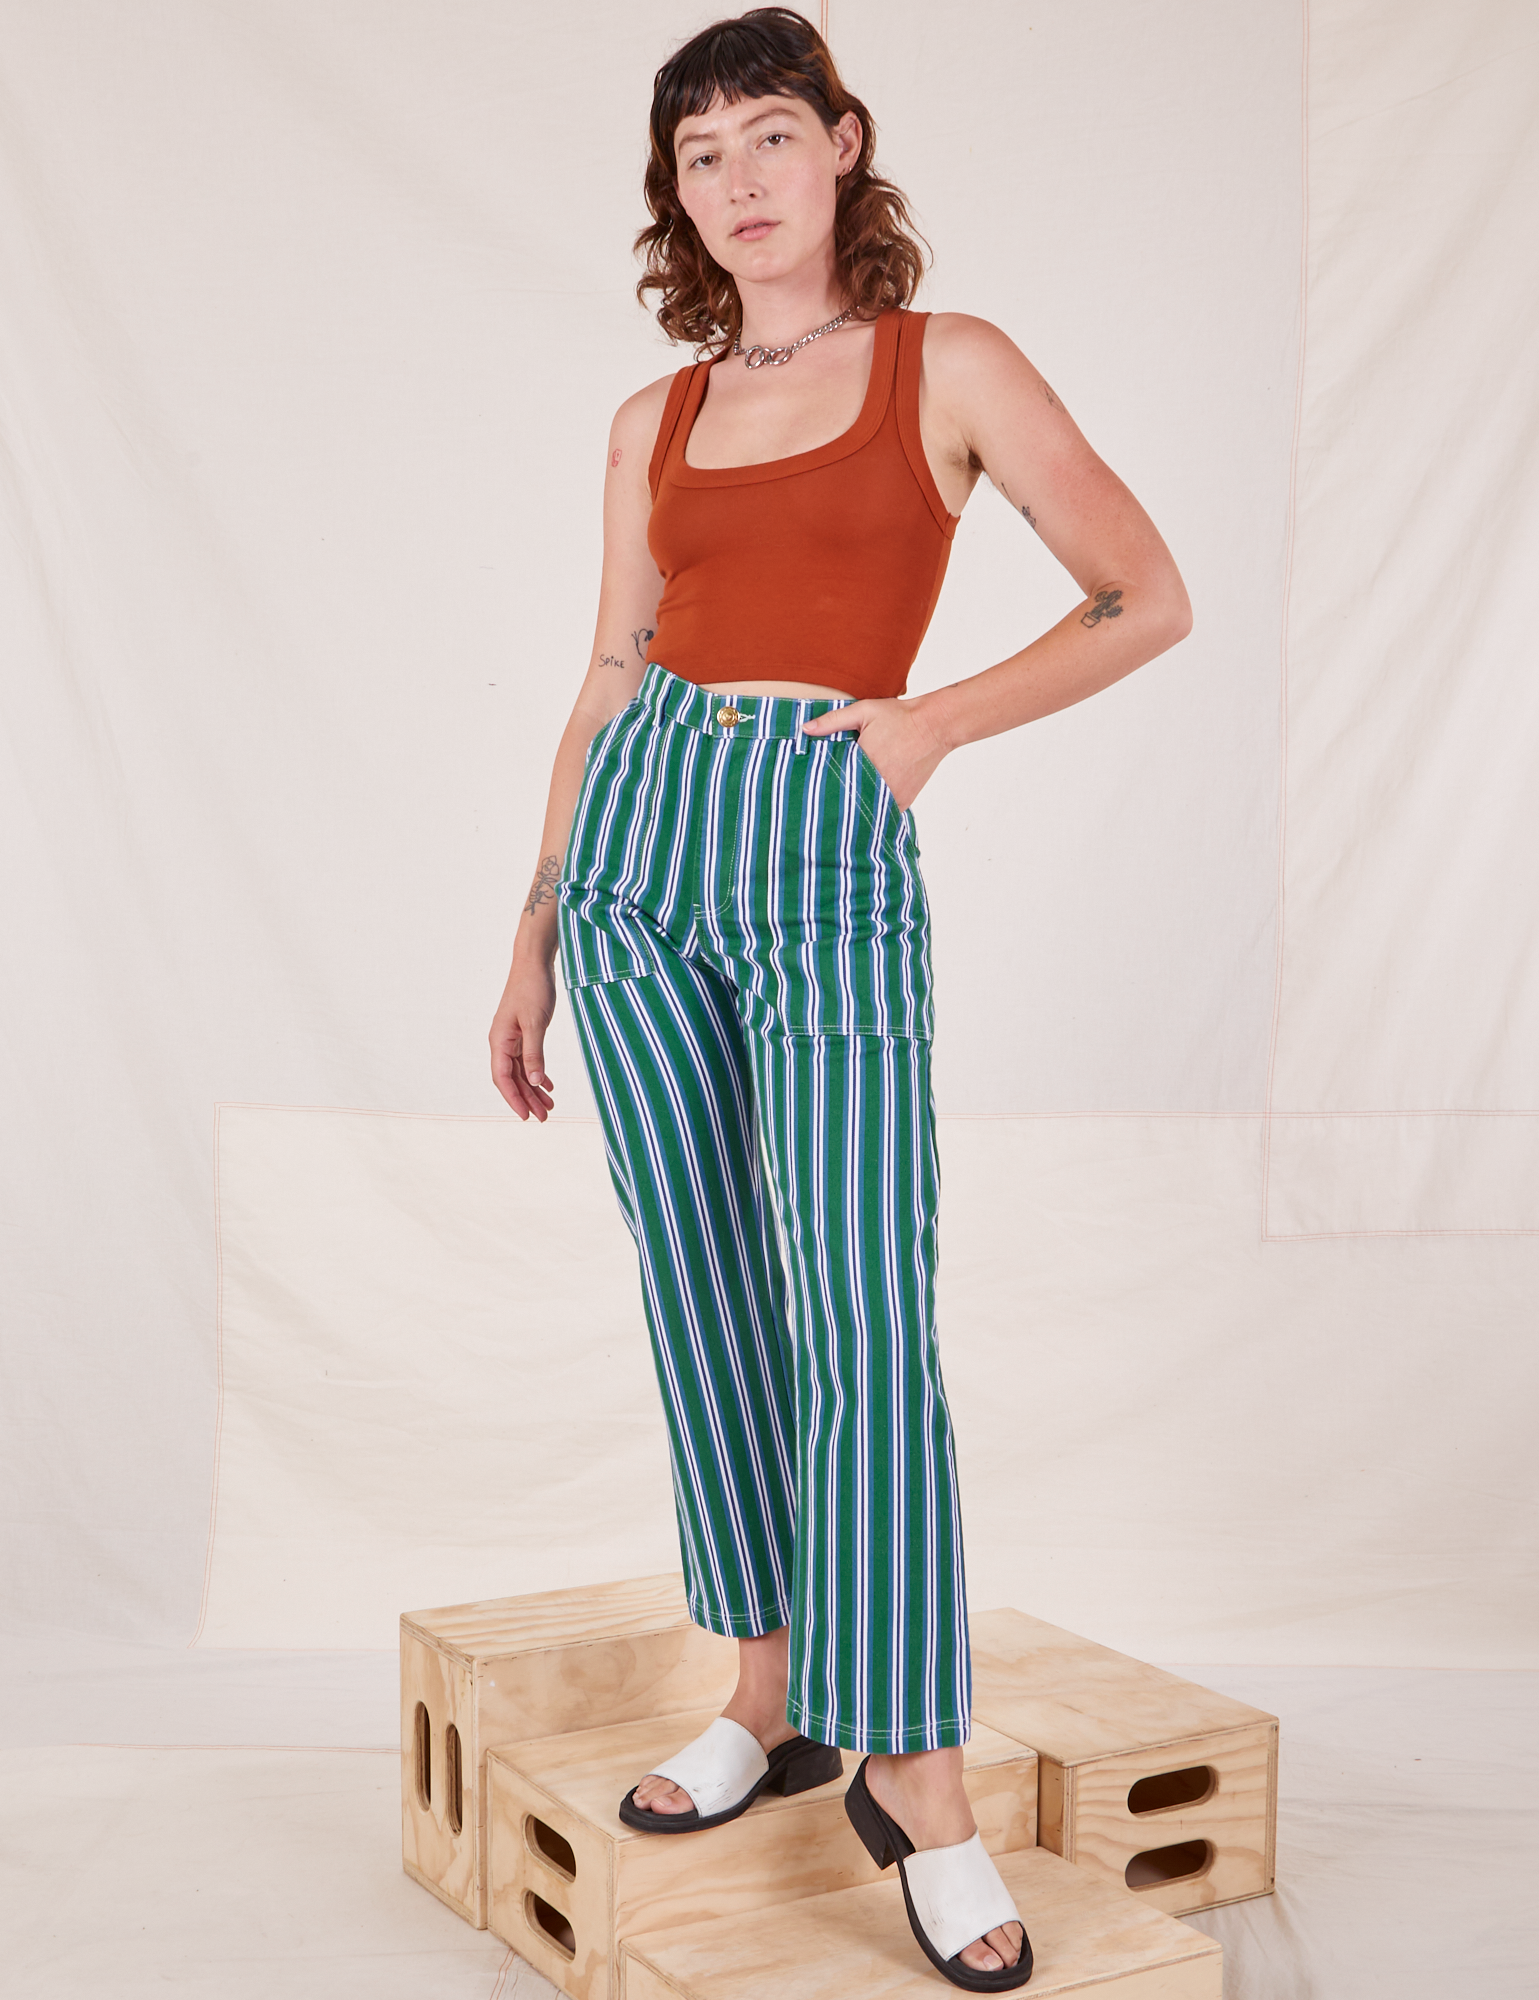 Alex is wearing Stripe Work Pants in Green and burnt terracotta Cropped Tank Top